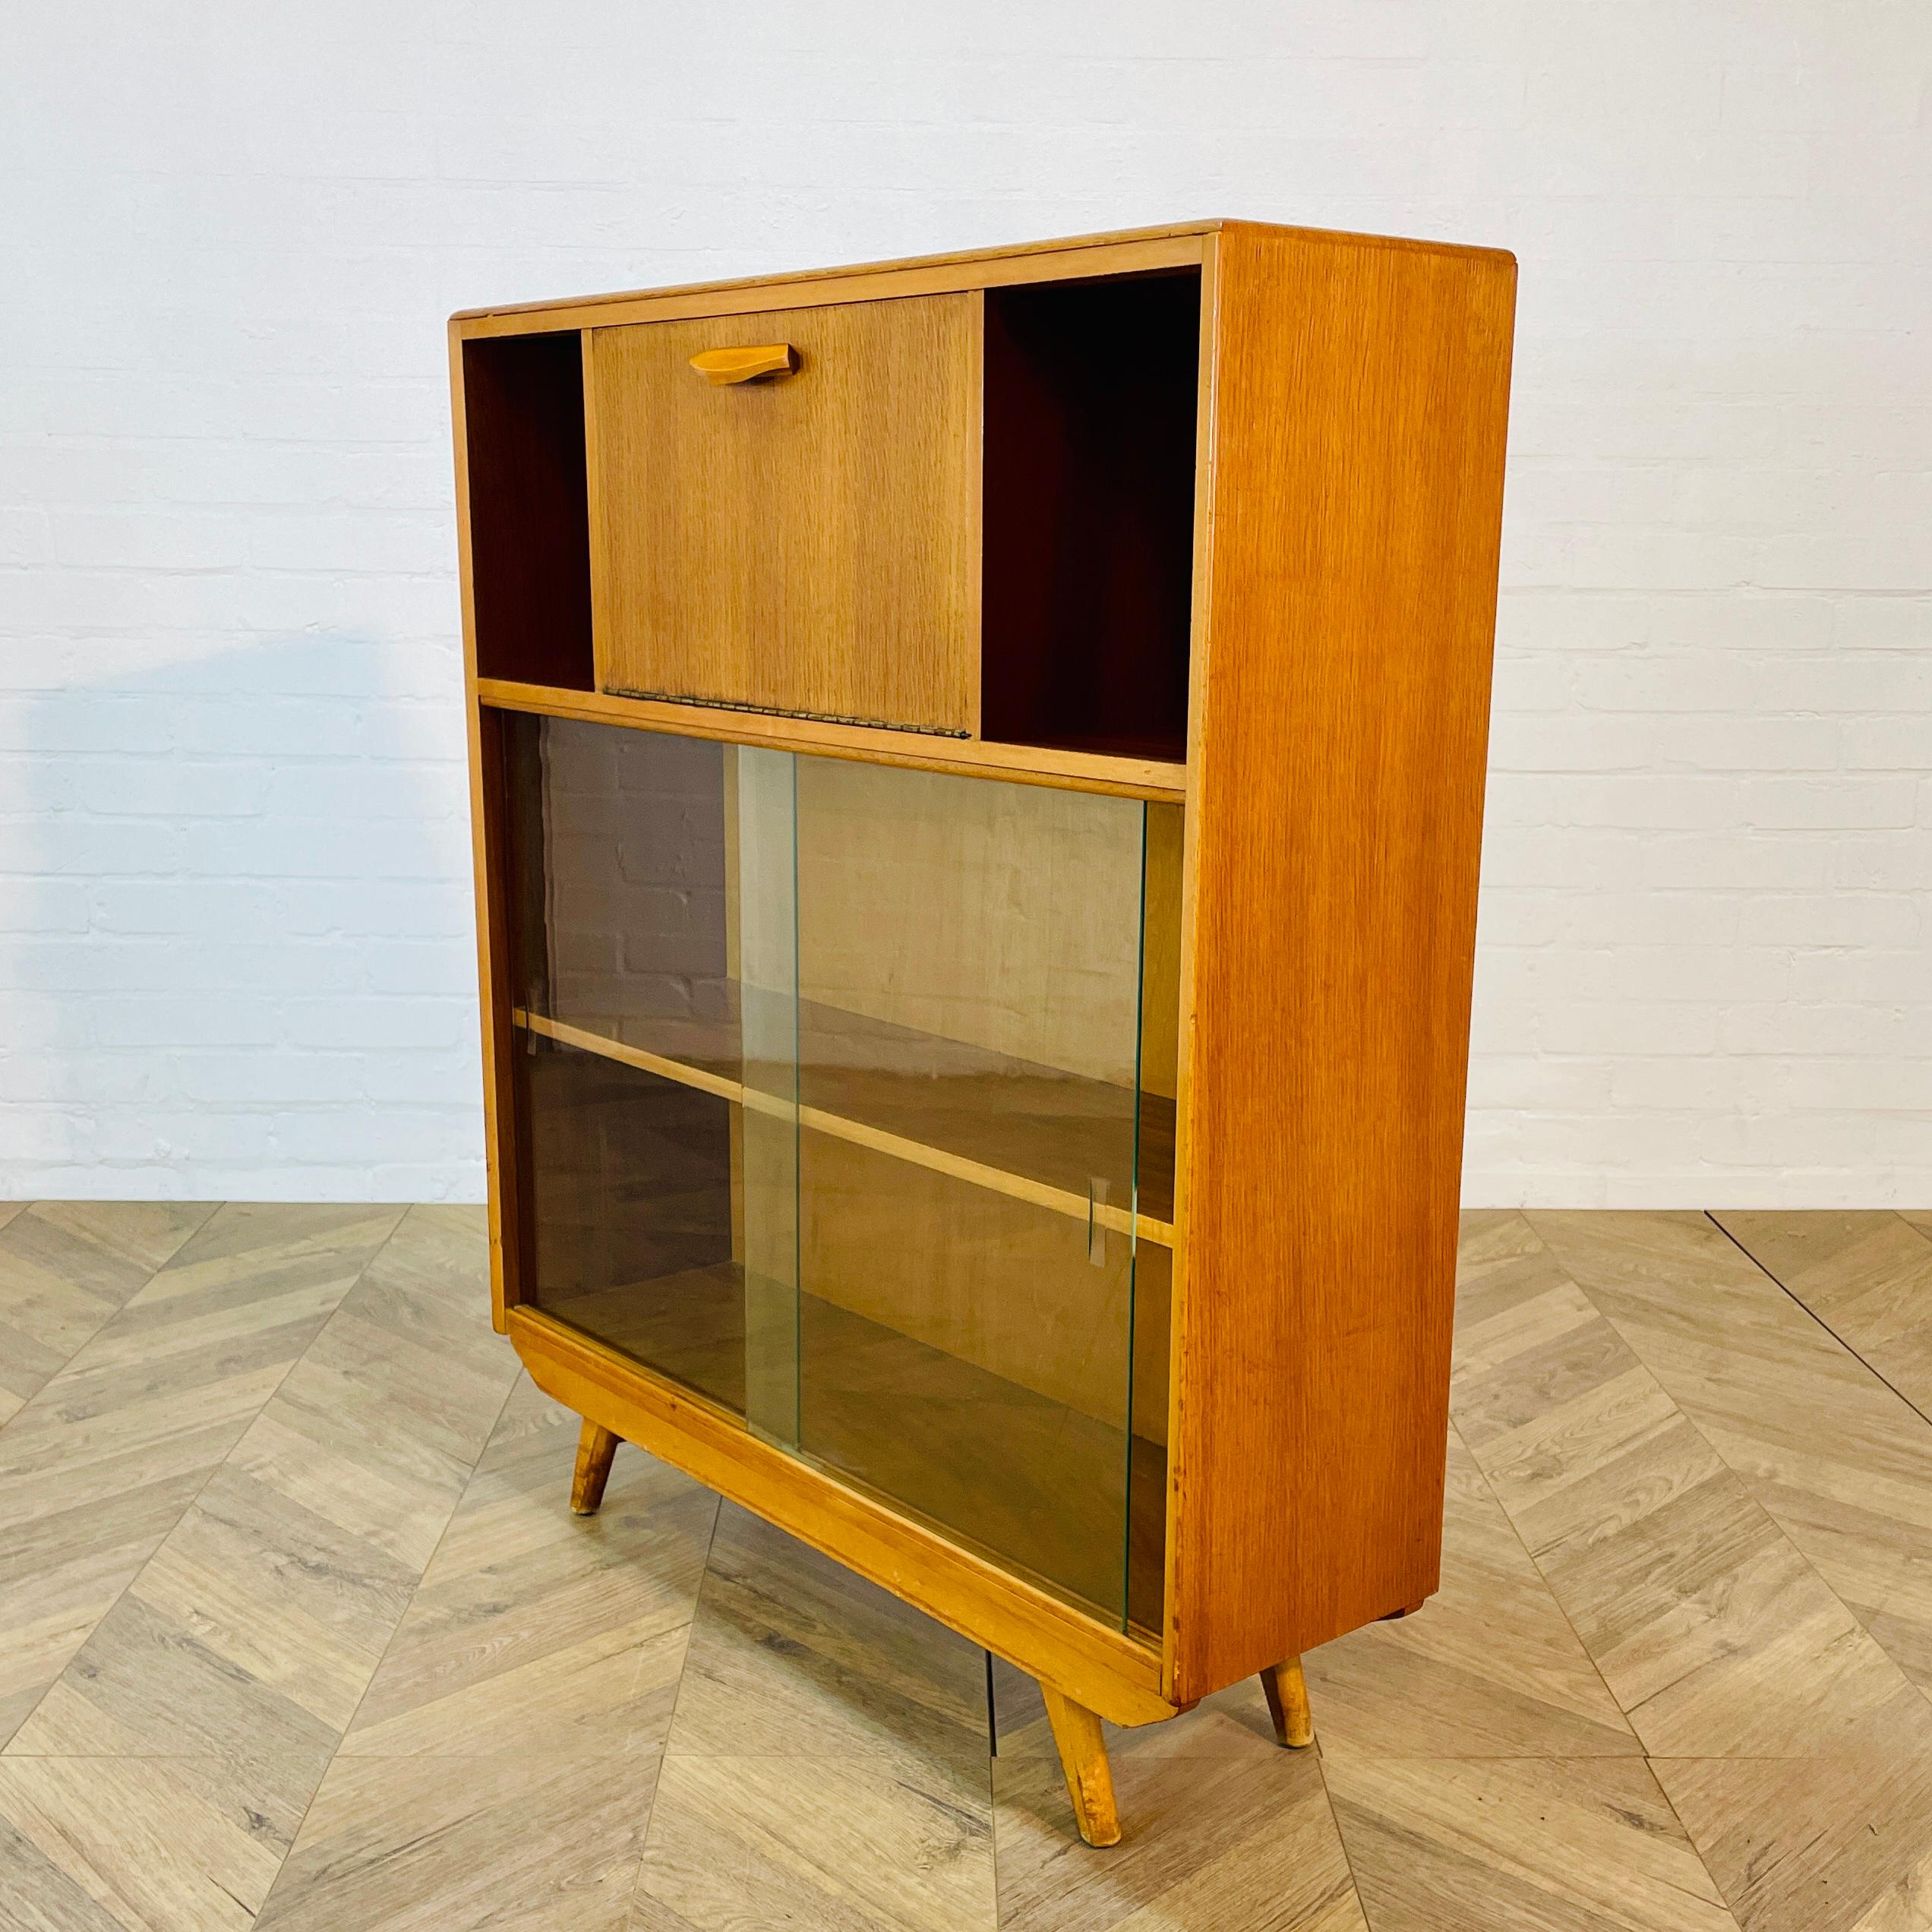 British Mid-Century Sideboard Display Cabinet, Made by Avalon, 1960s For Sale